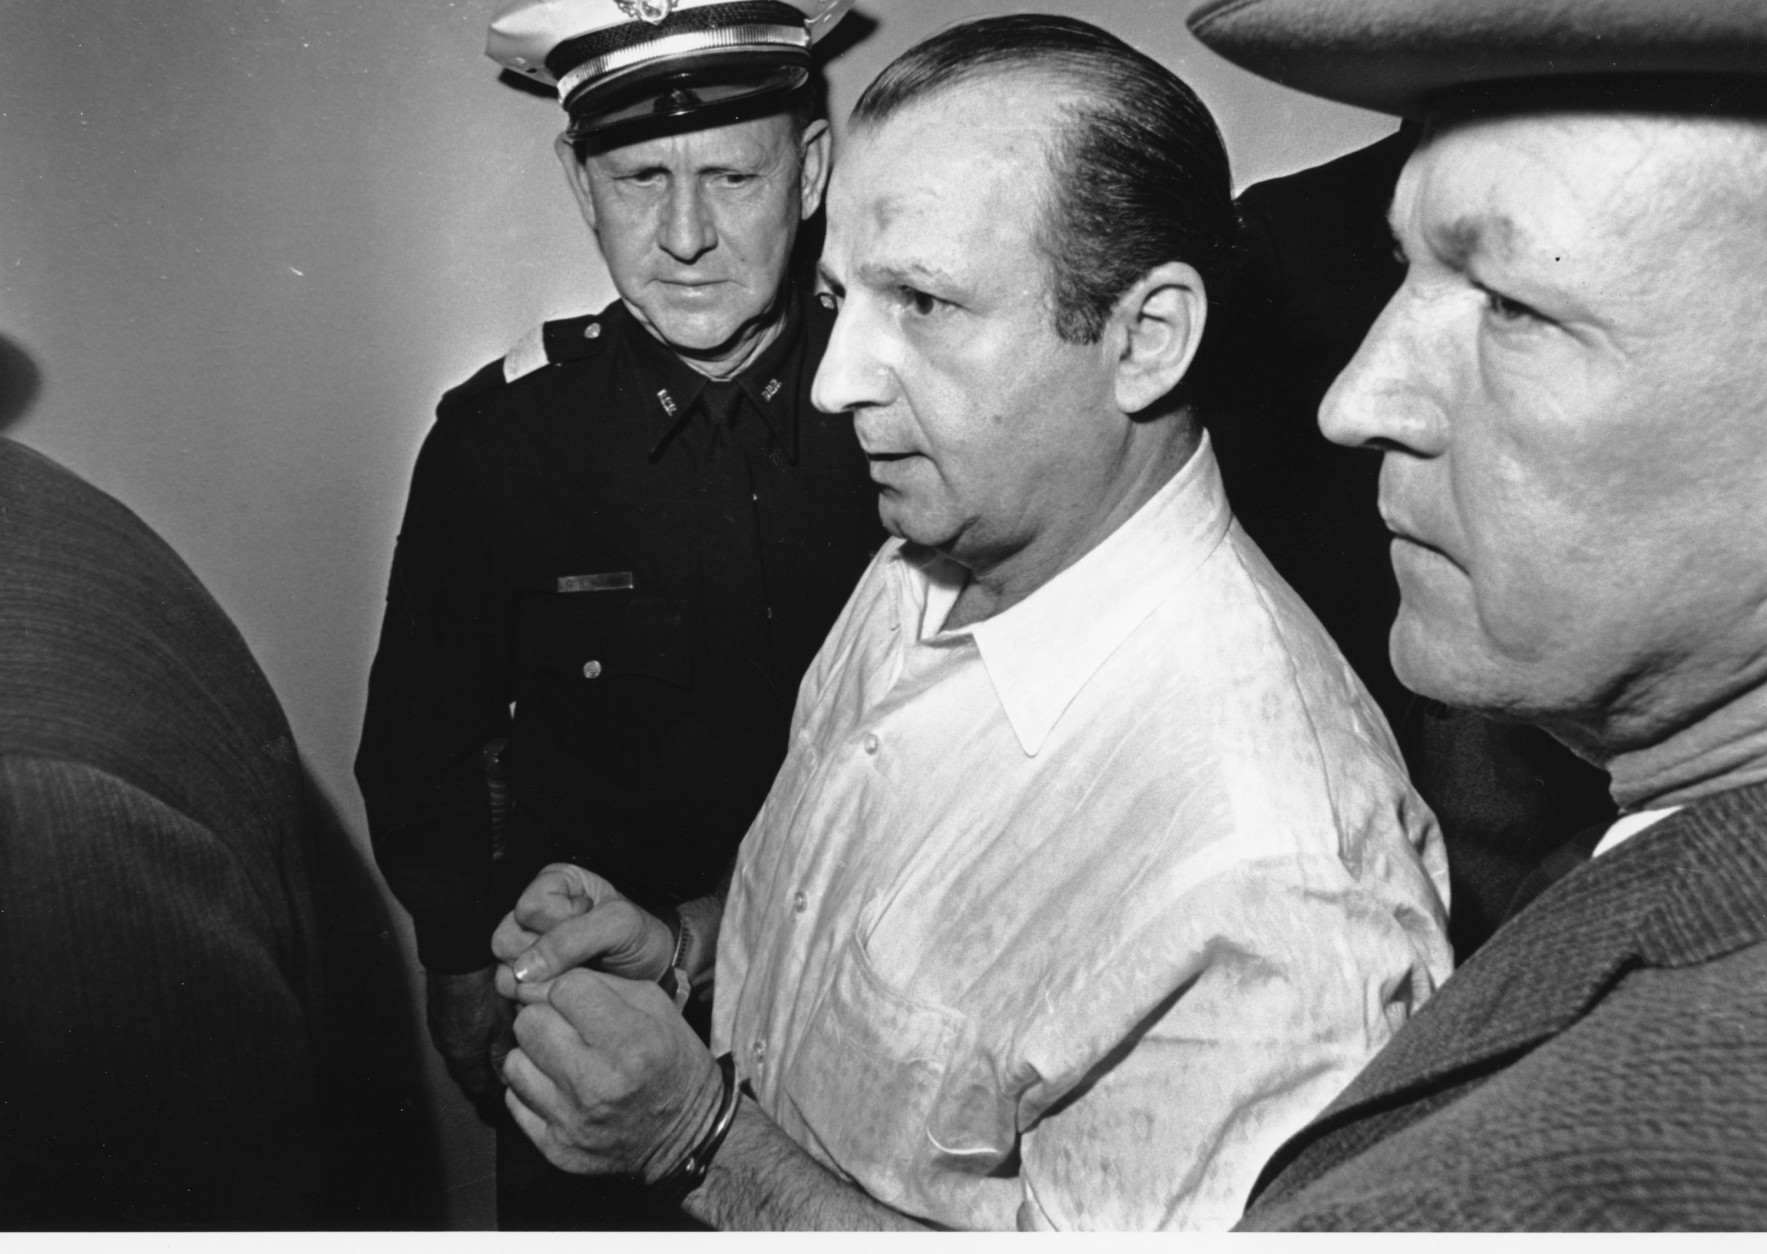 Nightclub owner Jack Ruby is led through the Dallas city jail on his way to his arraignment in Dallas, Tex. on Nov. 24, 1963.  Ruby was charged for the murder of Lee Harvey Oswald, the man accused with assassinating John F. Kennedy.  Others are unidentified.  (AP Photo)